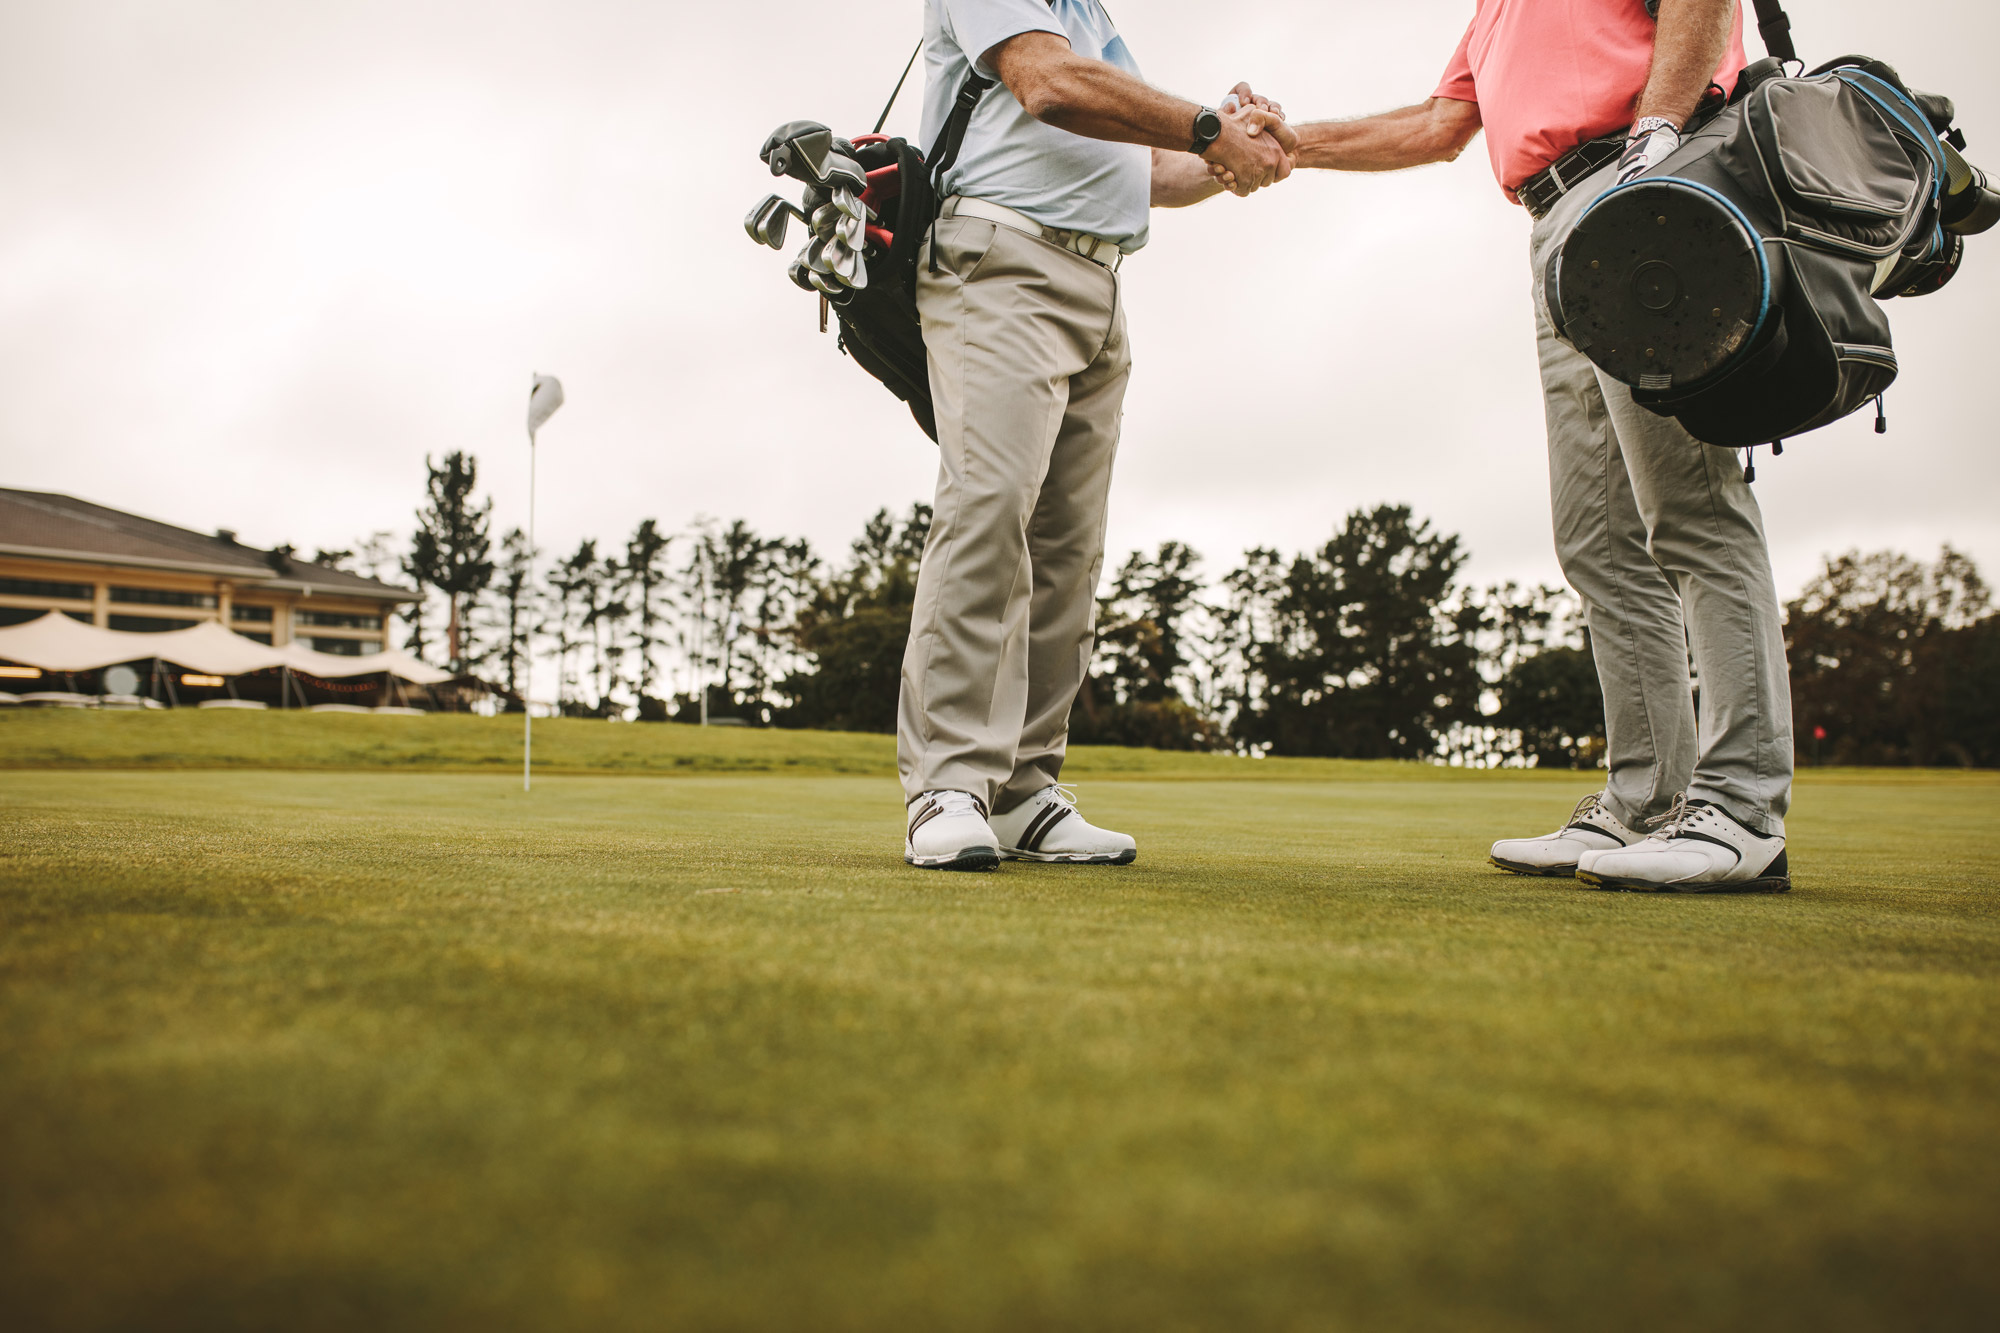 Tips for creating the perfect golf event